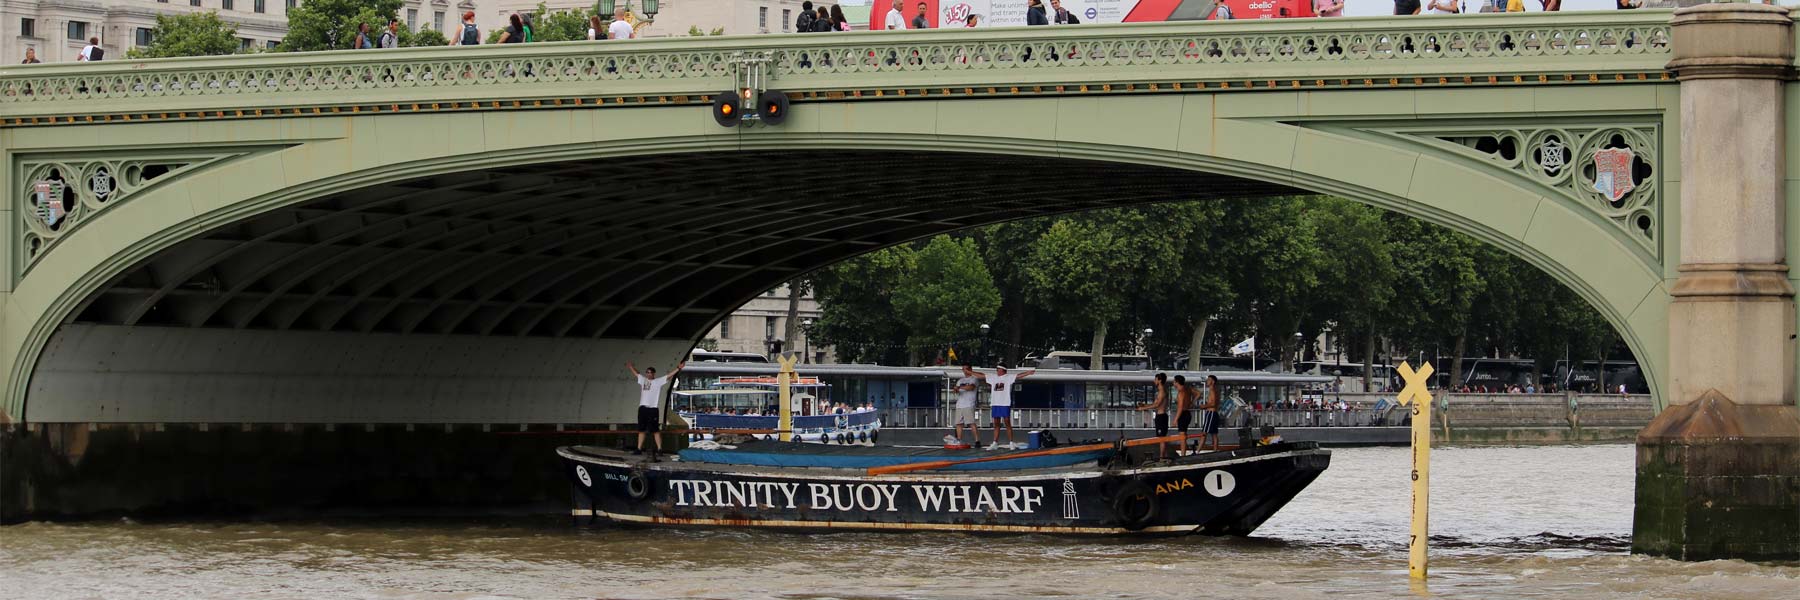 Thames Barge Driving Trust News & Features